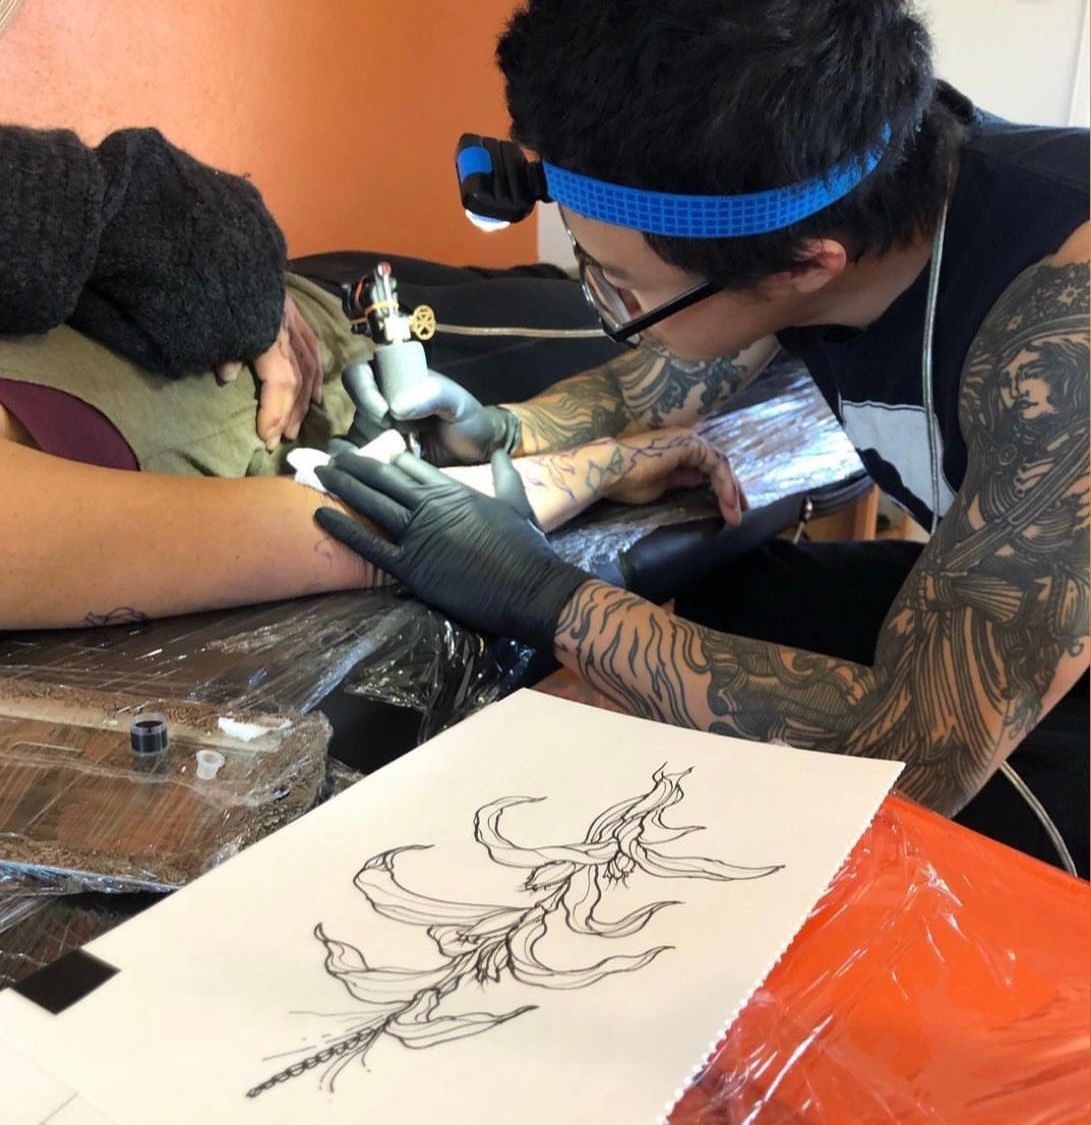 Jason working on my tattoo a man tattoos a corn plant onto an arm, the image is drawn on paper in the foreground 